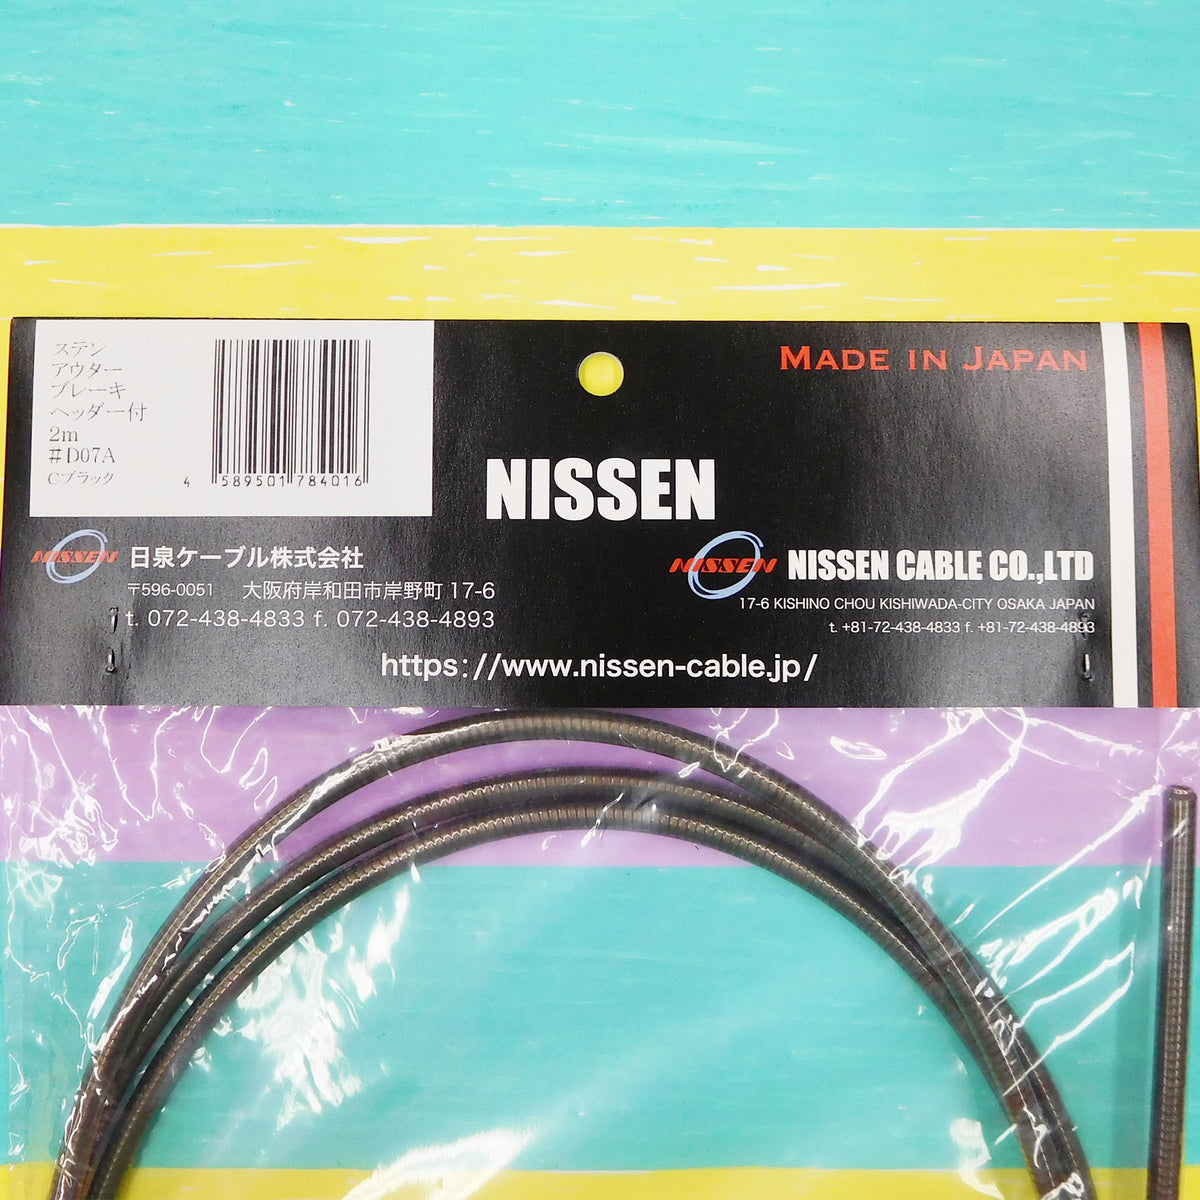 NISSEN STAINLESS STEEL *BRAKE* OUTER CASING 2m CLEAR